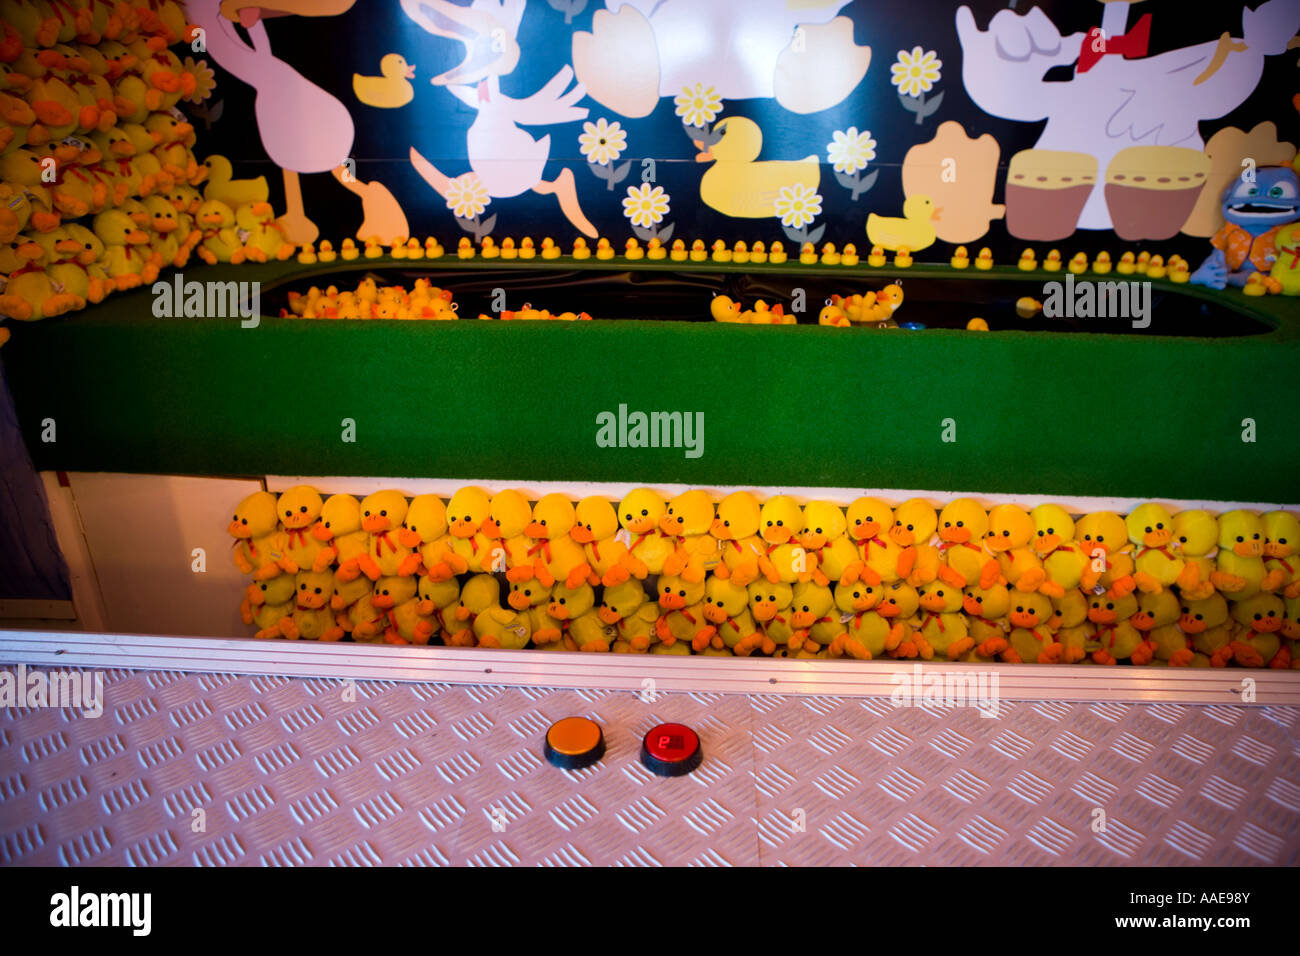 Duck game in an amusement arcade Stock Photo